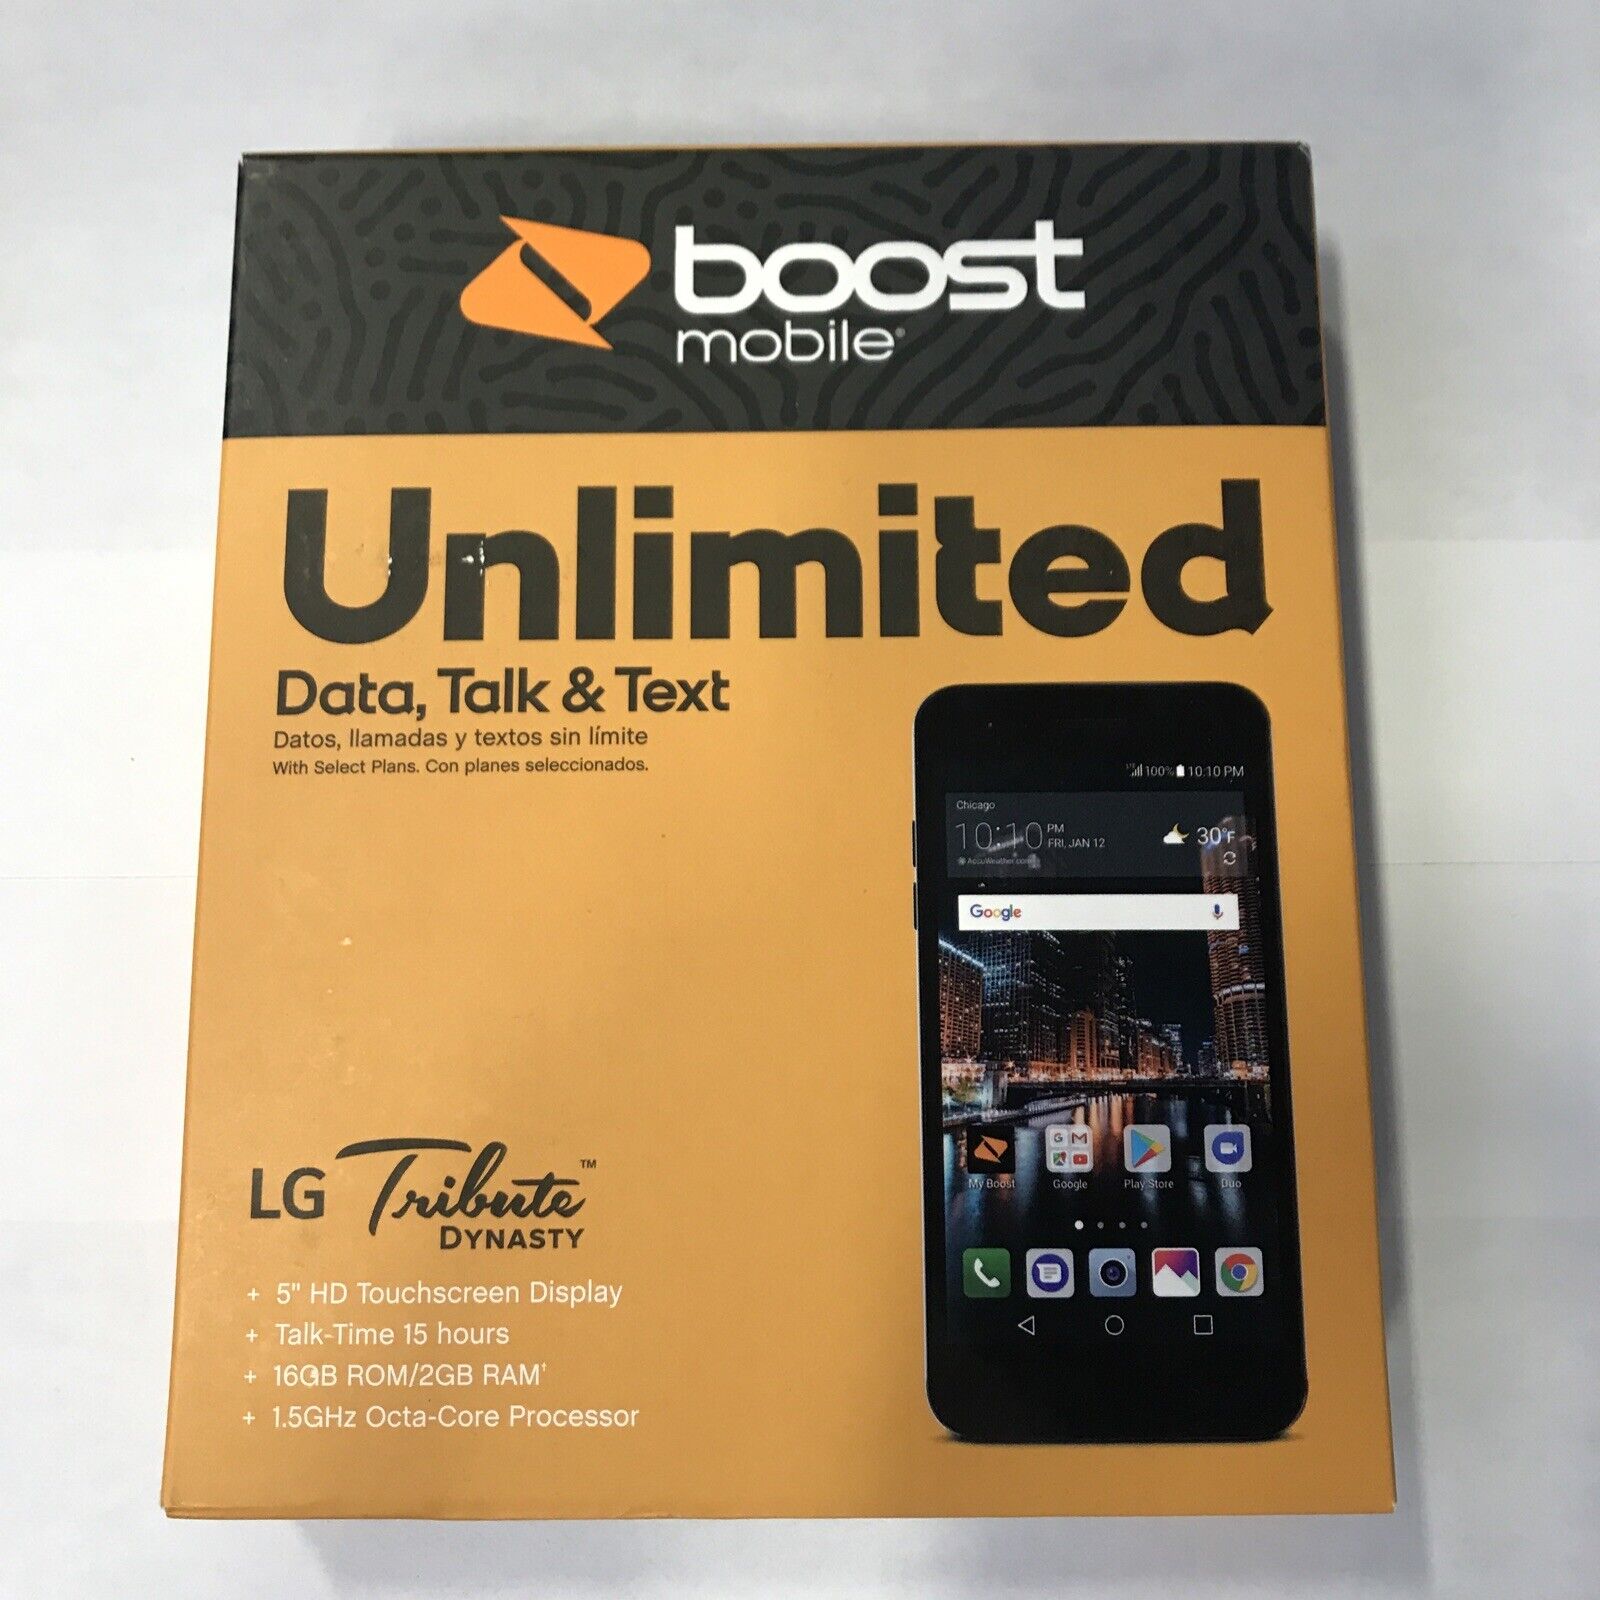 LG Tribute Dynasty - 16GB - Gold (Boost Mobile) Open Box